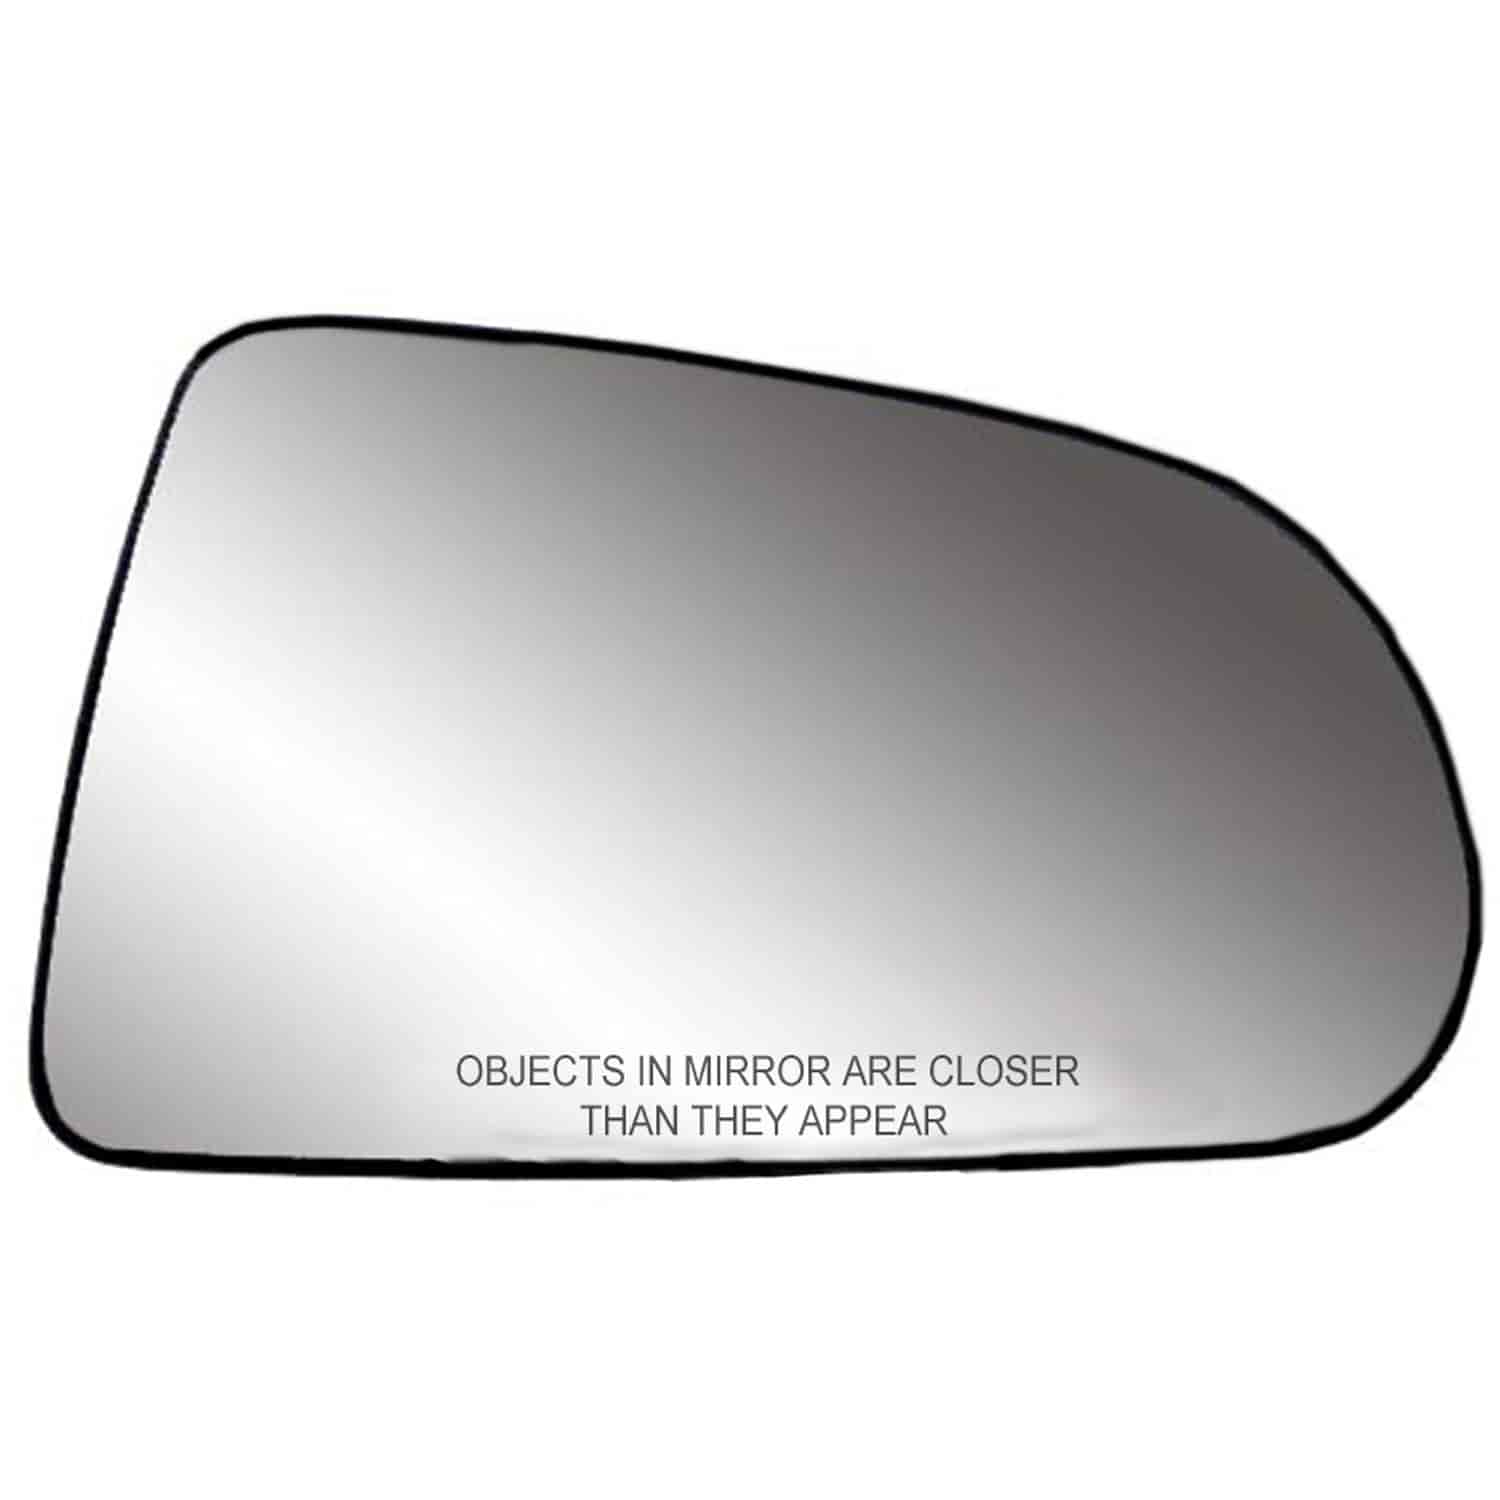 Replacement Glass Assembly for 05-10 Dakota non-foldaway mirrors 5x7 replace your cracked or broken